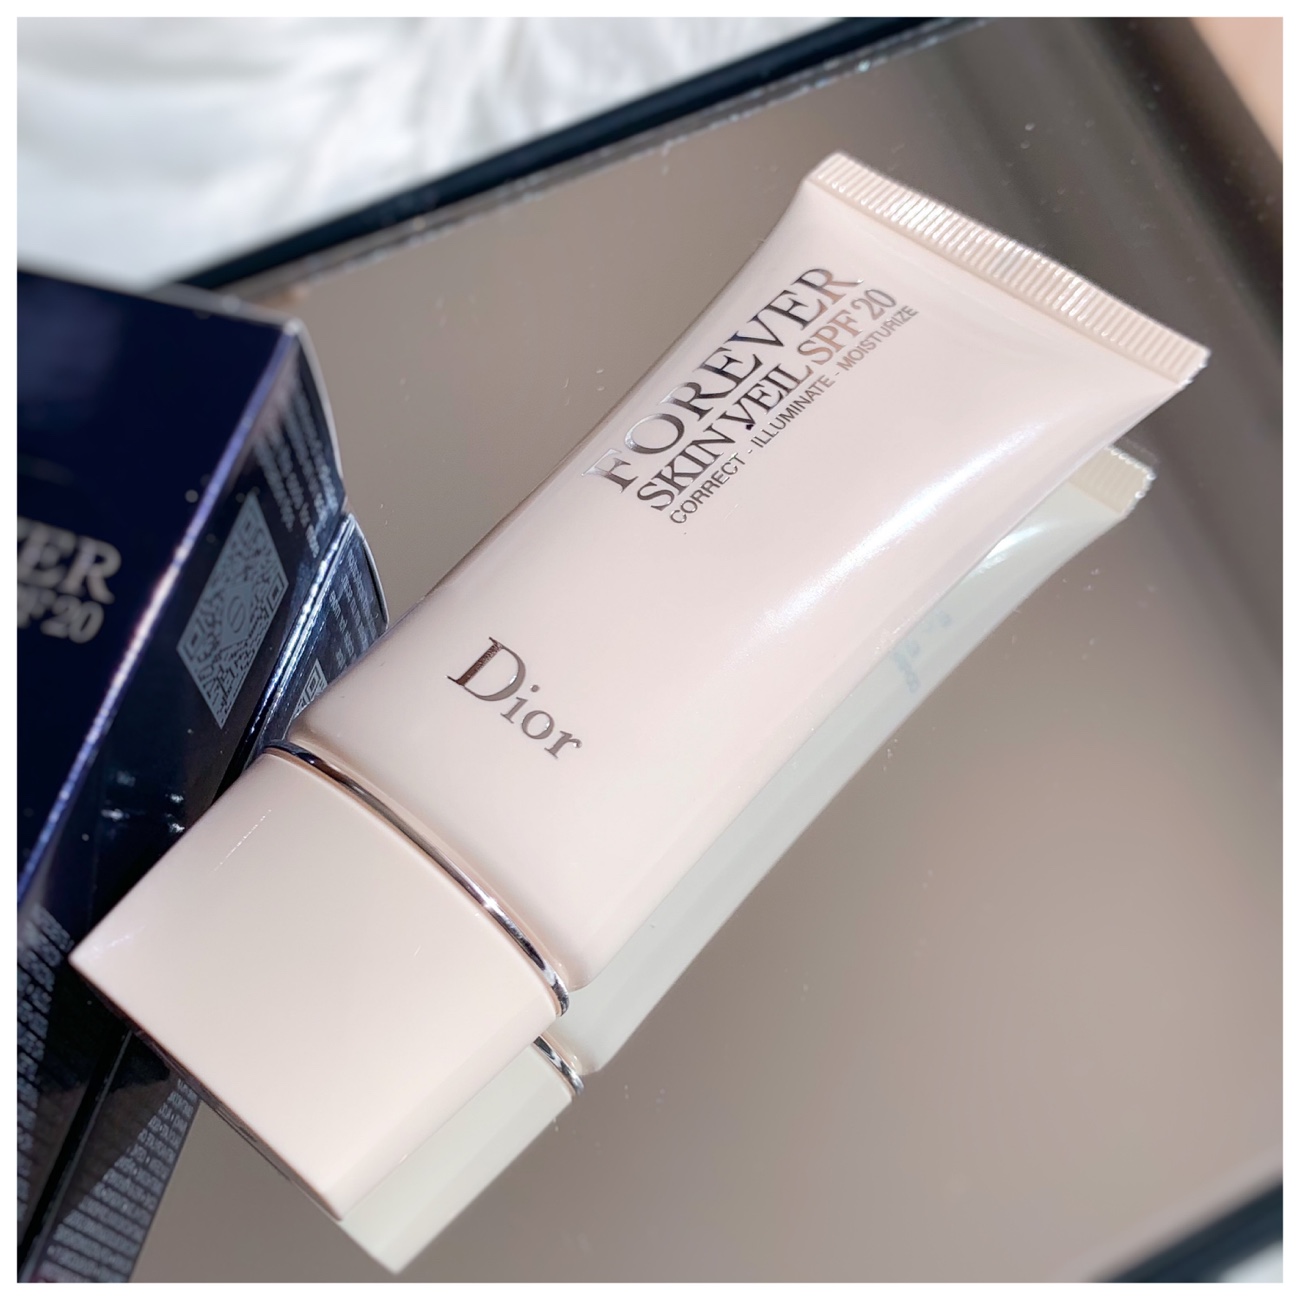 NEW Dior Skin Veil - correction, protection and illumination in one